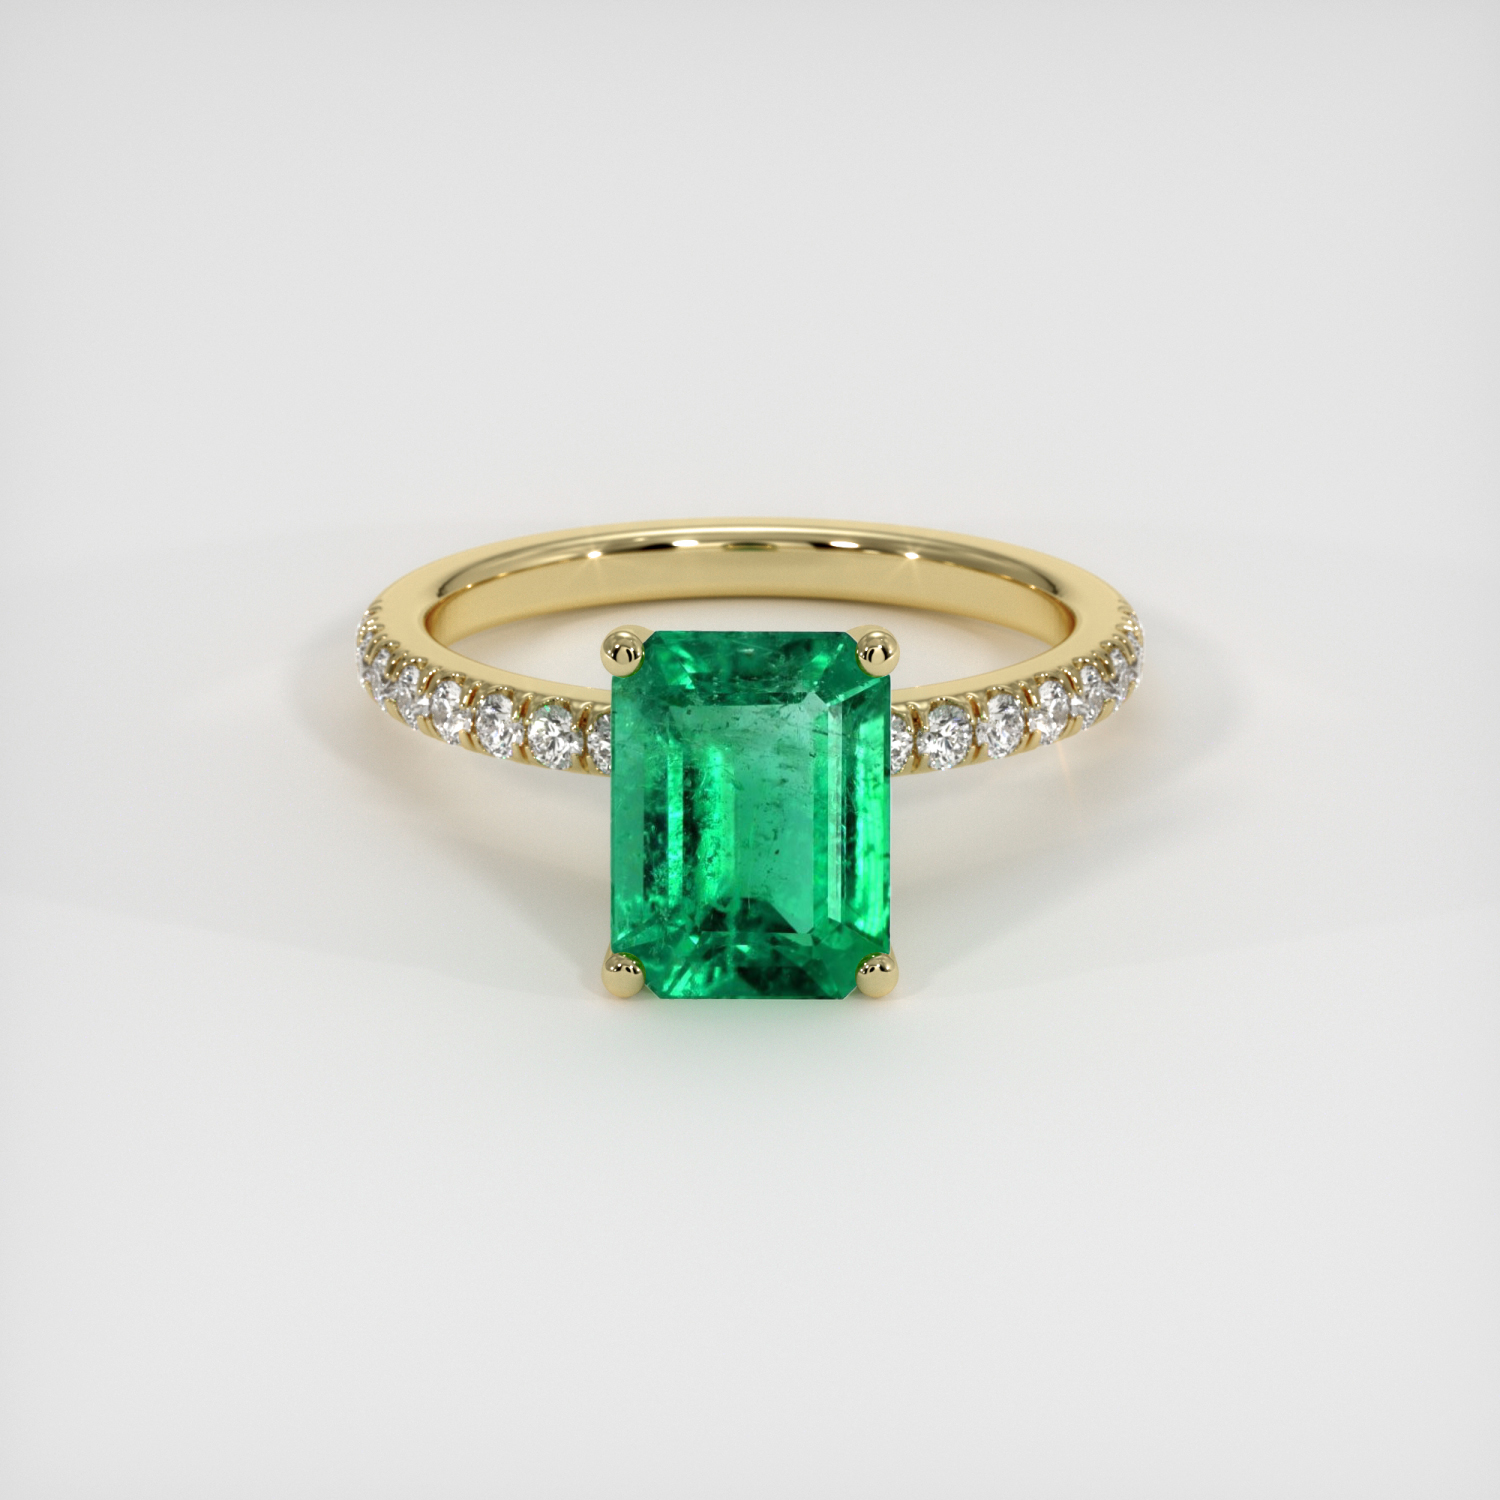 Emerald Ring 1.43 Ct. 18K Yellow Gold | The Natural Emerald Company